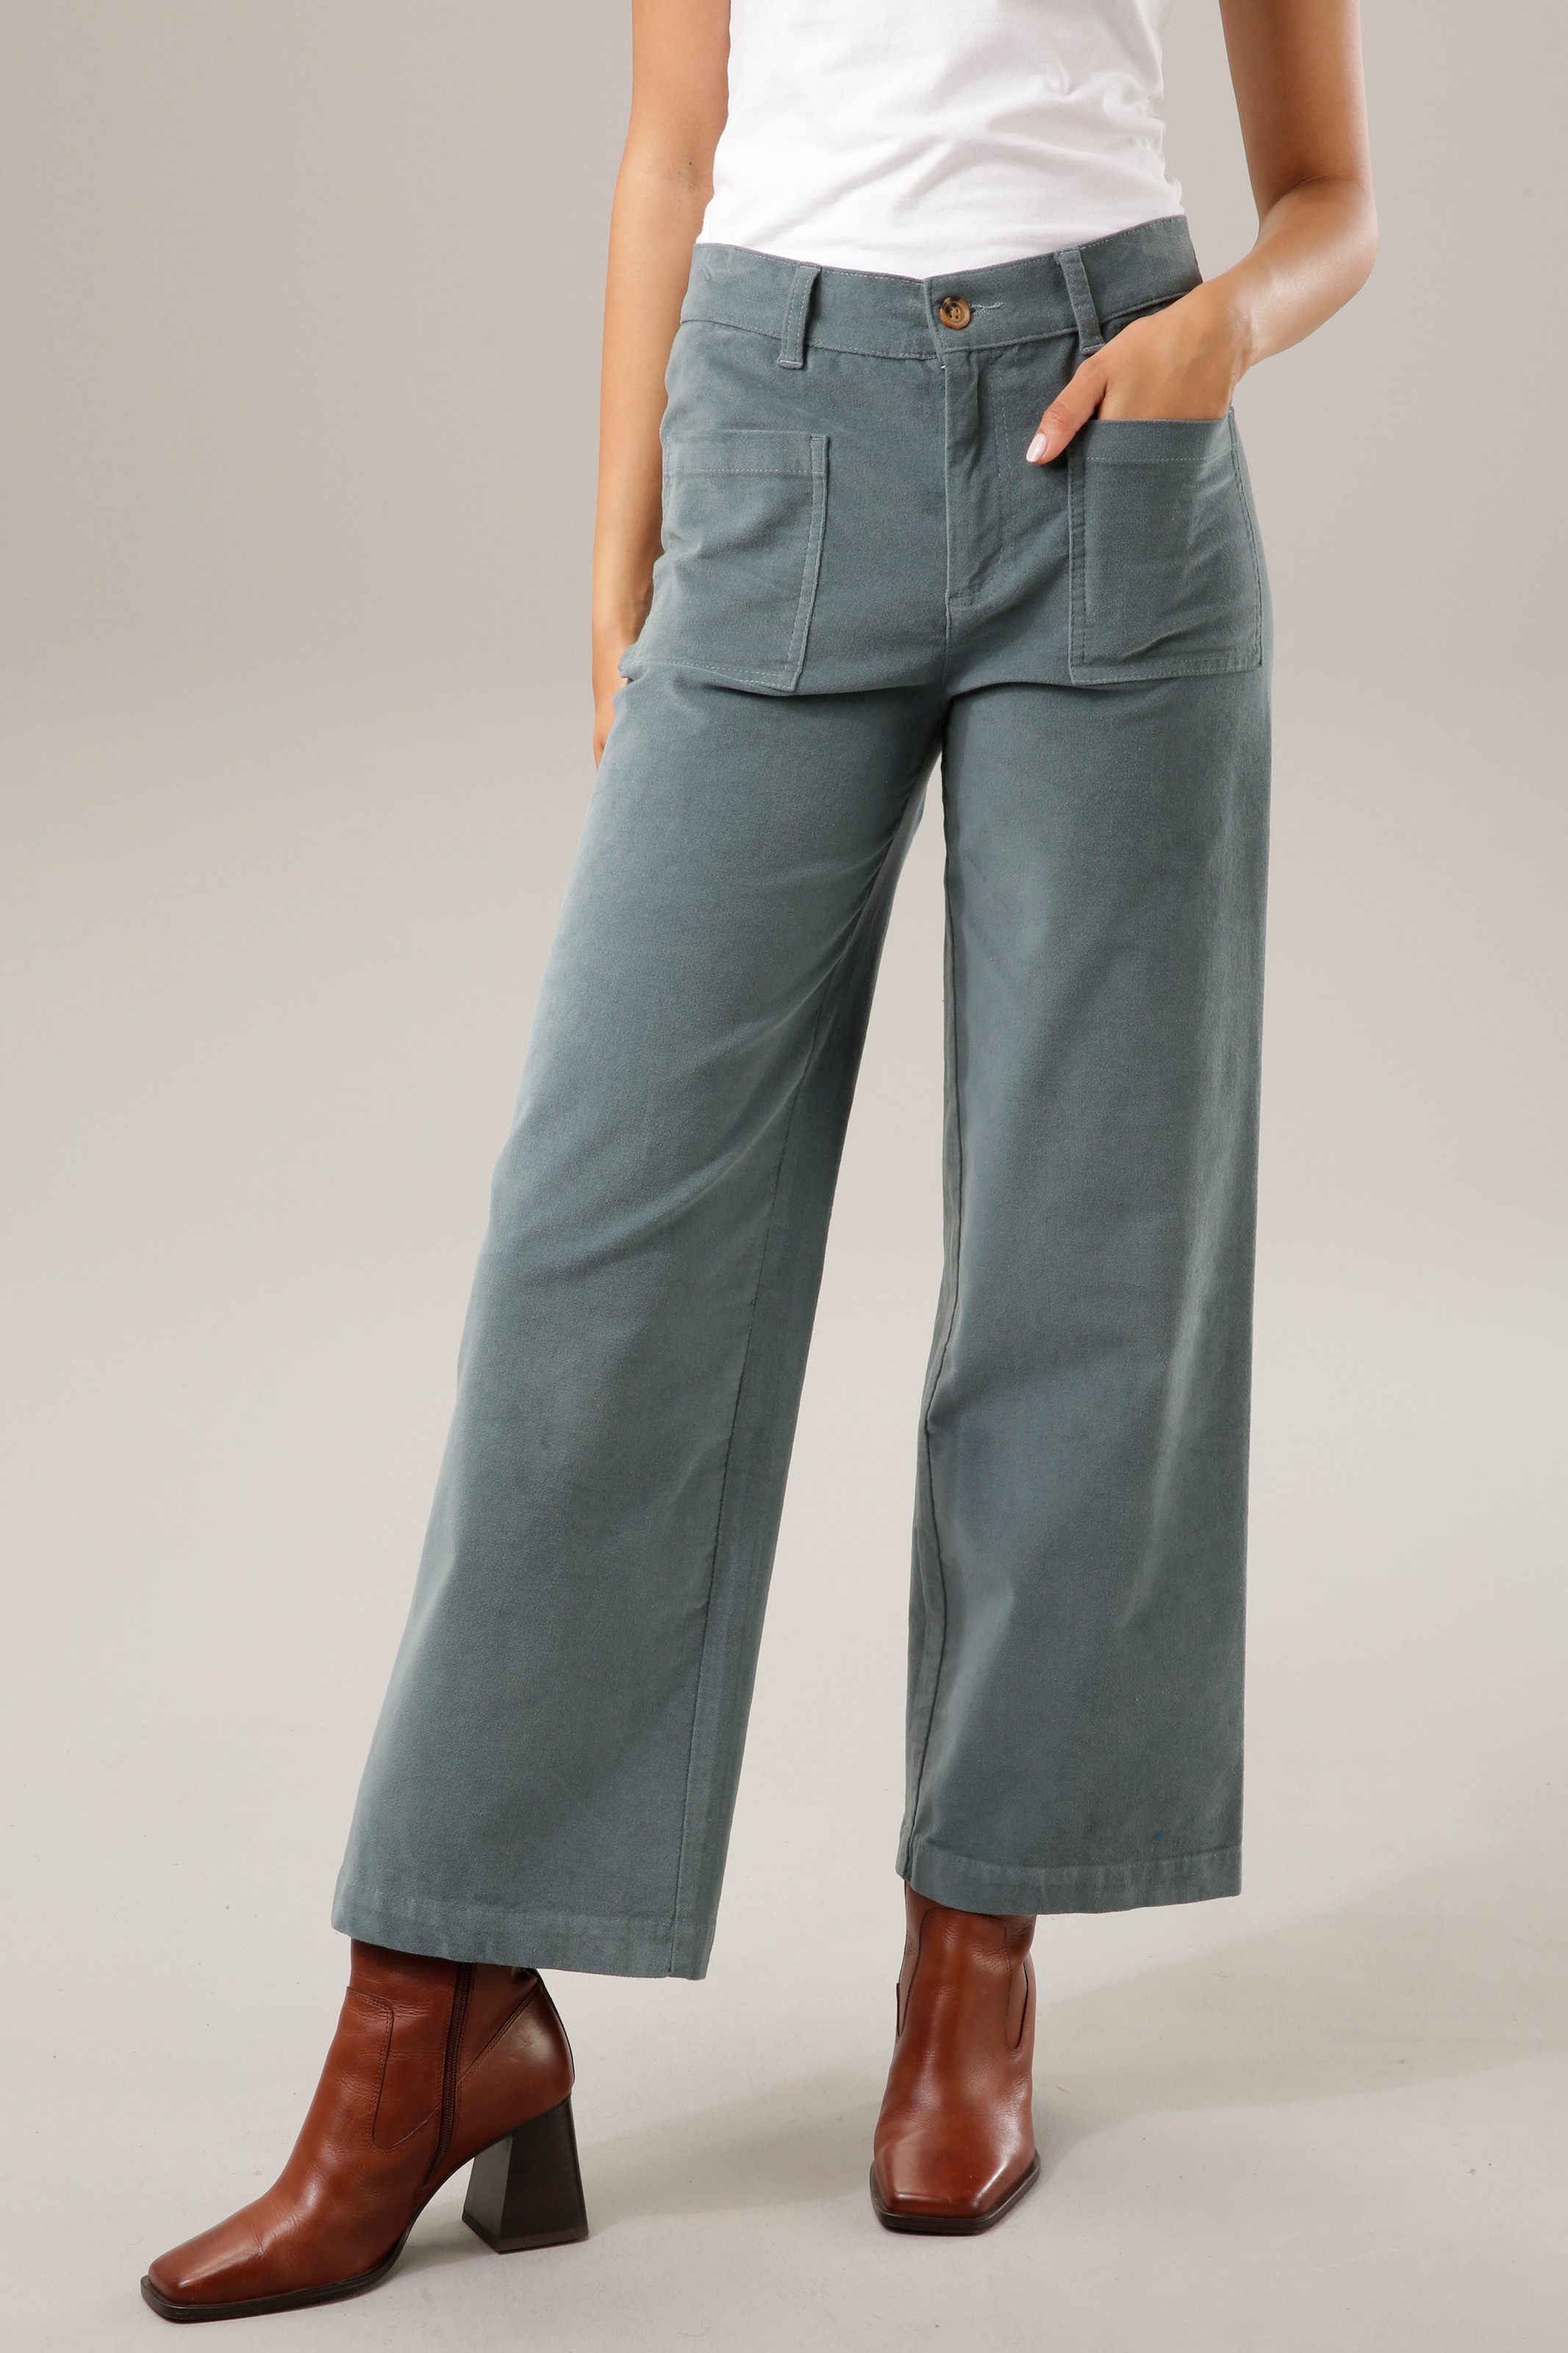 Aniston CASUAL Cordhose, in bei Hight-waist-Form angesagter ♕